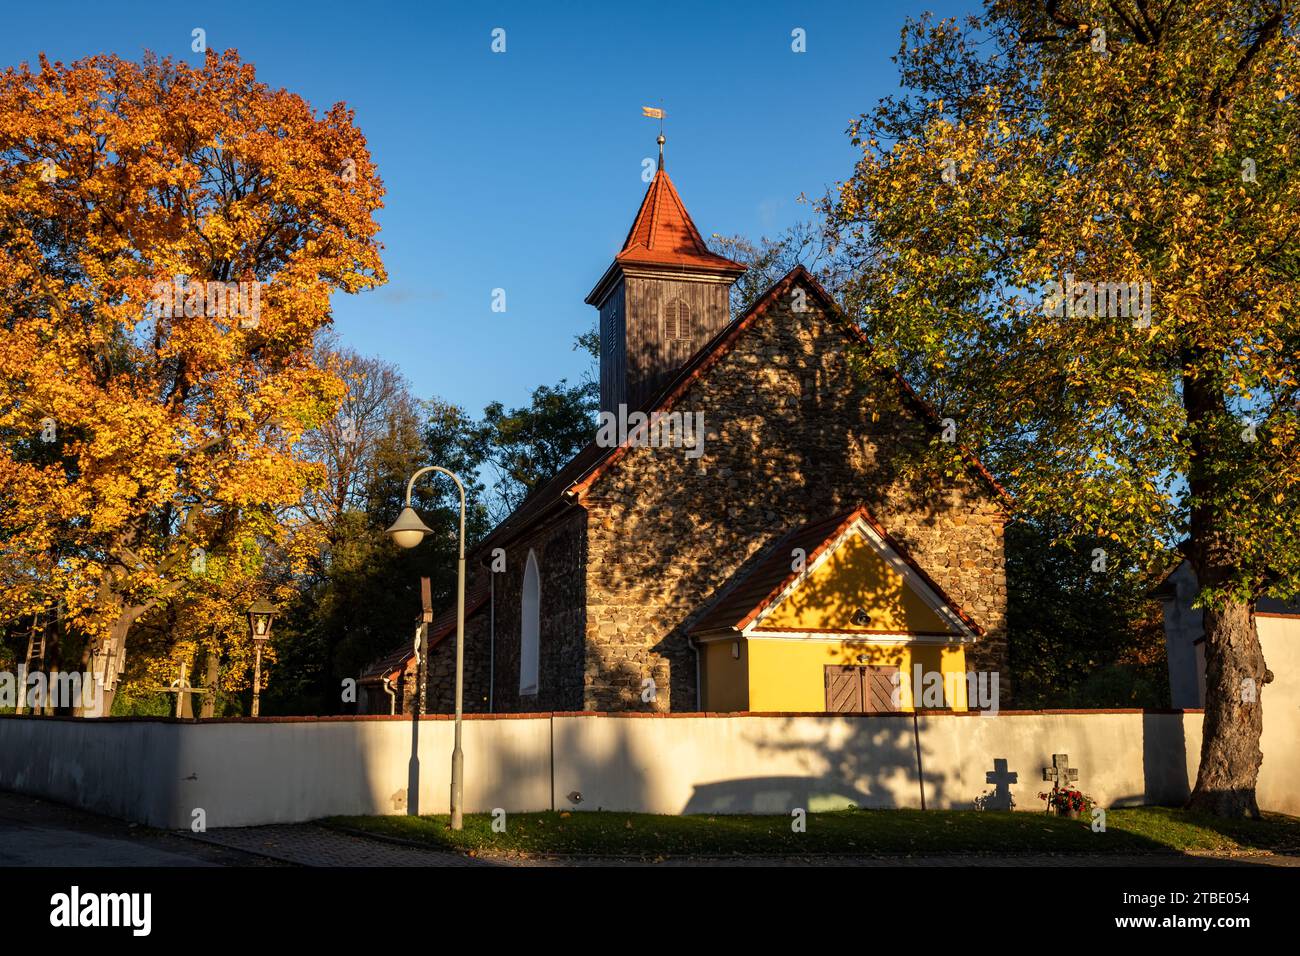 Krzyzowa, Poland - October 29, 2023: Historic gothic church of St Michael the Archangel in the autumn. Stock Photo